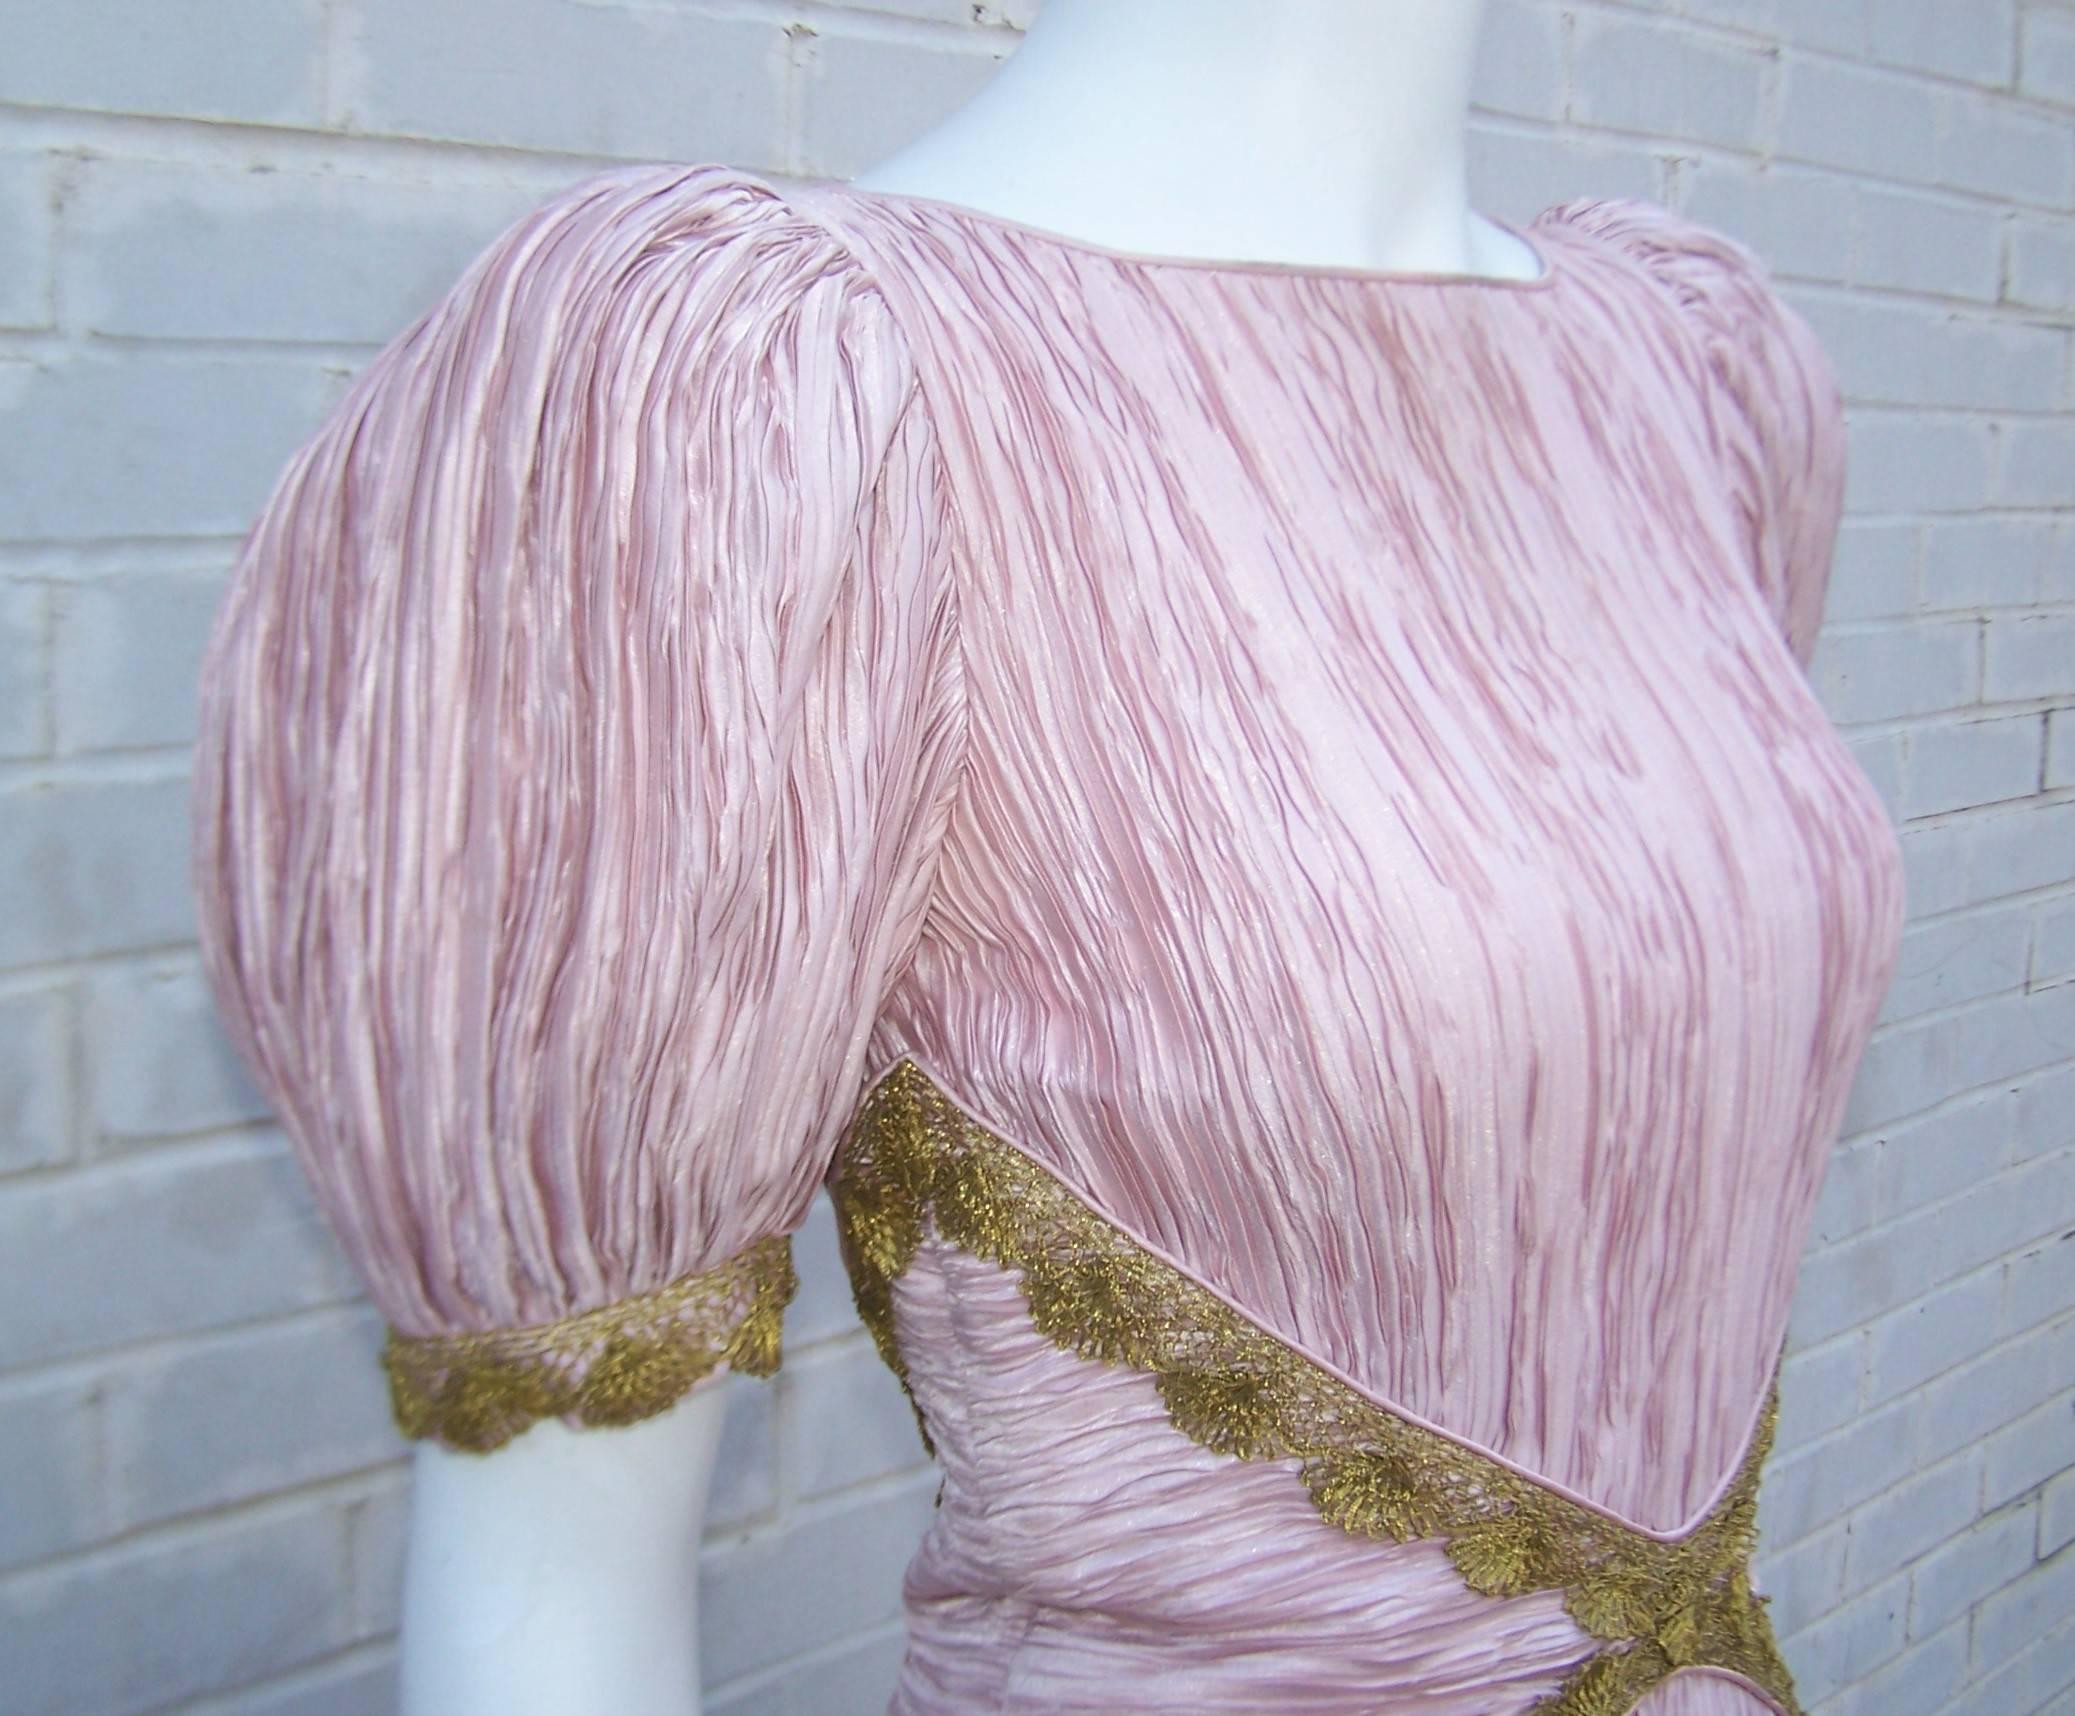 Heavenly 1980's Mary McFadden Pink Goddess Dress With Gold Braid 4